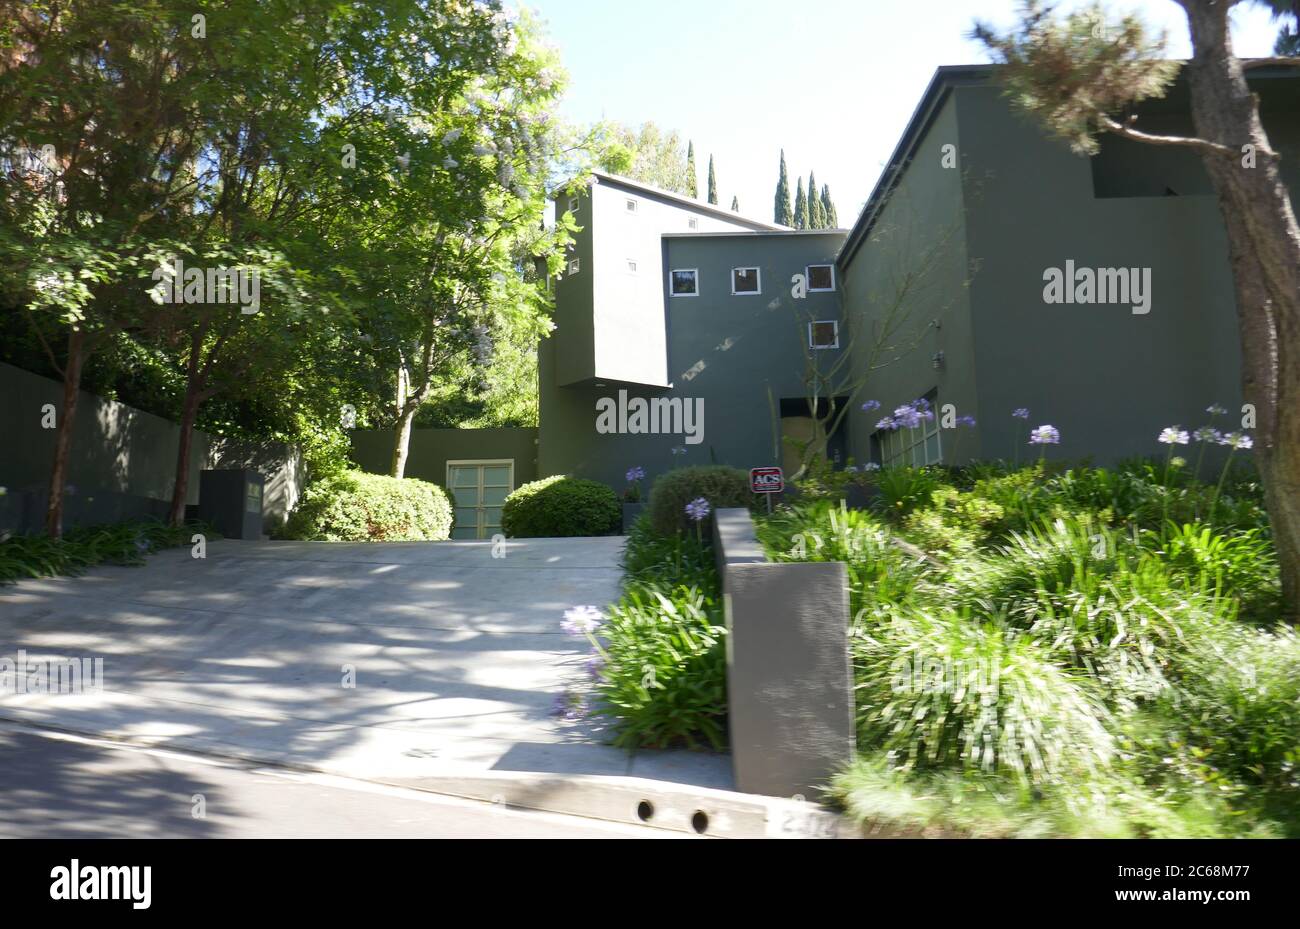 Beverly Hills, California, USA 7th July 2020 A general view of atmosphere of JFK's former mistress Judith Campbell's former home at 2314 San Ysidro Drive in Beverly Hills, California, USA. Photo by Barry King/Alamy Stock Photo Stock Photo